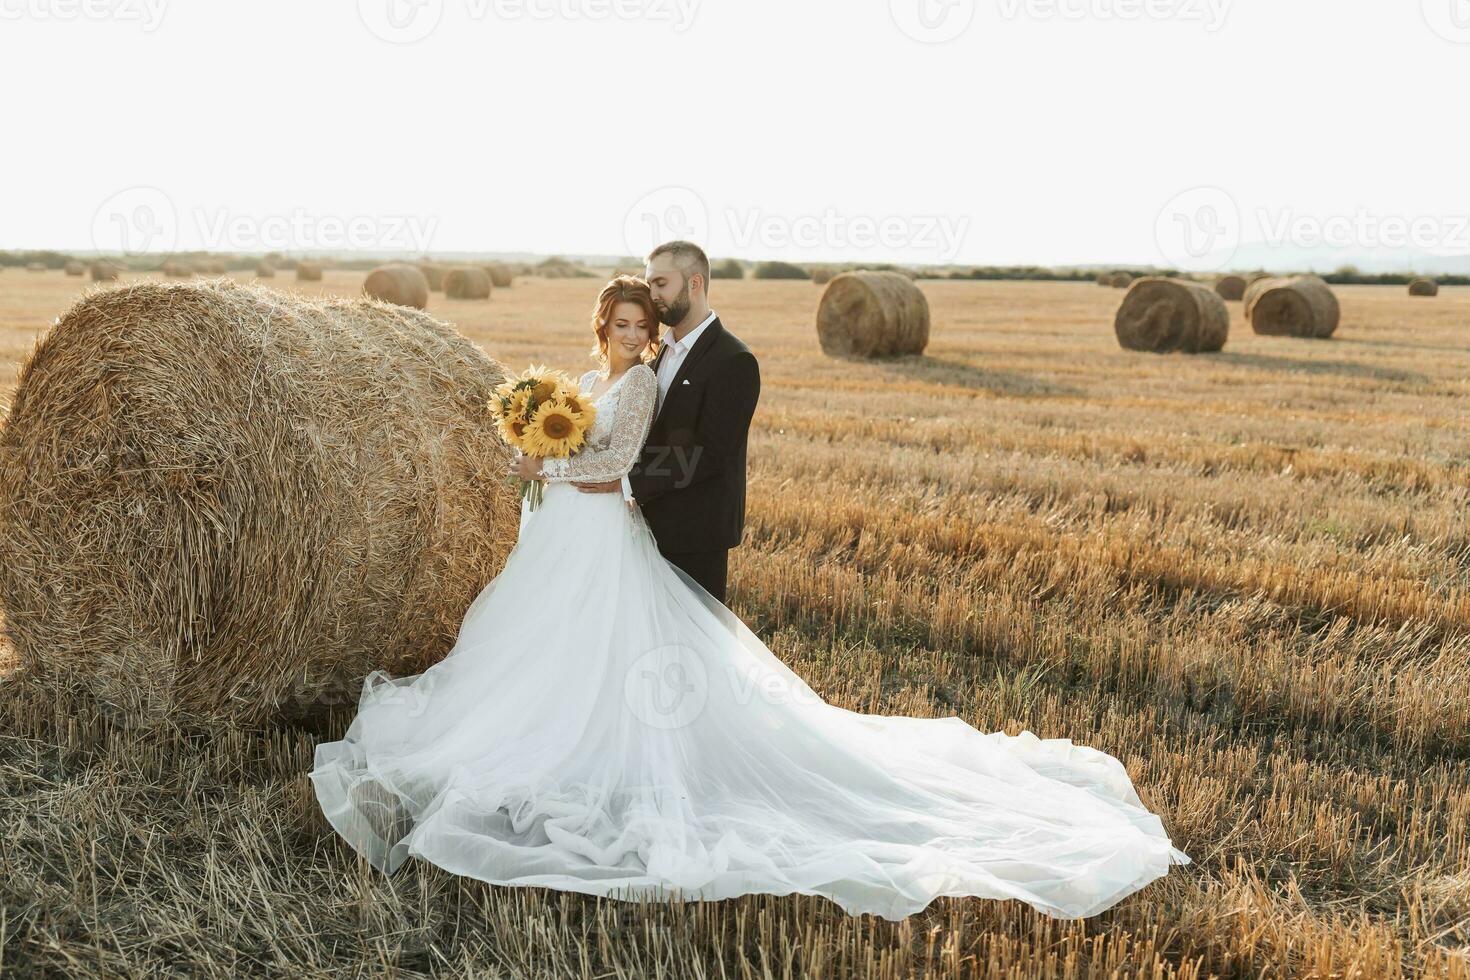 Wedding portrait of the bride and groom. The groom hugs the bride from behind, next to a bale of hay. Red-haired bride in a long dress with a bouquet of sunflowers. Stylish groom. Summer photo